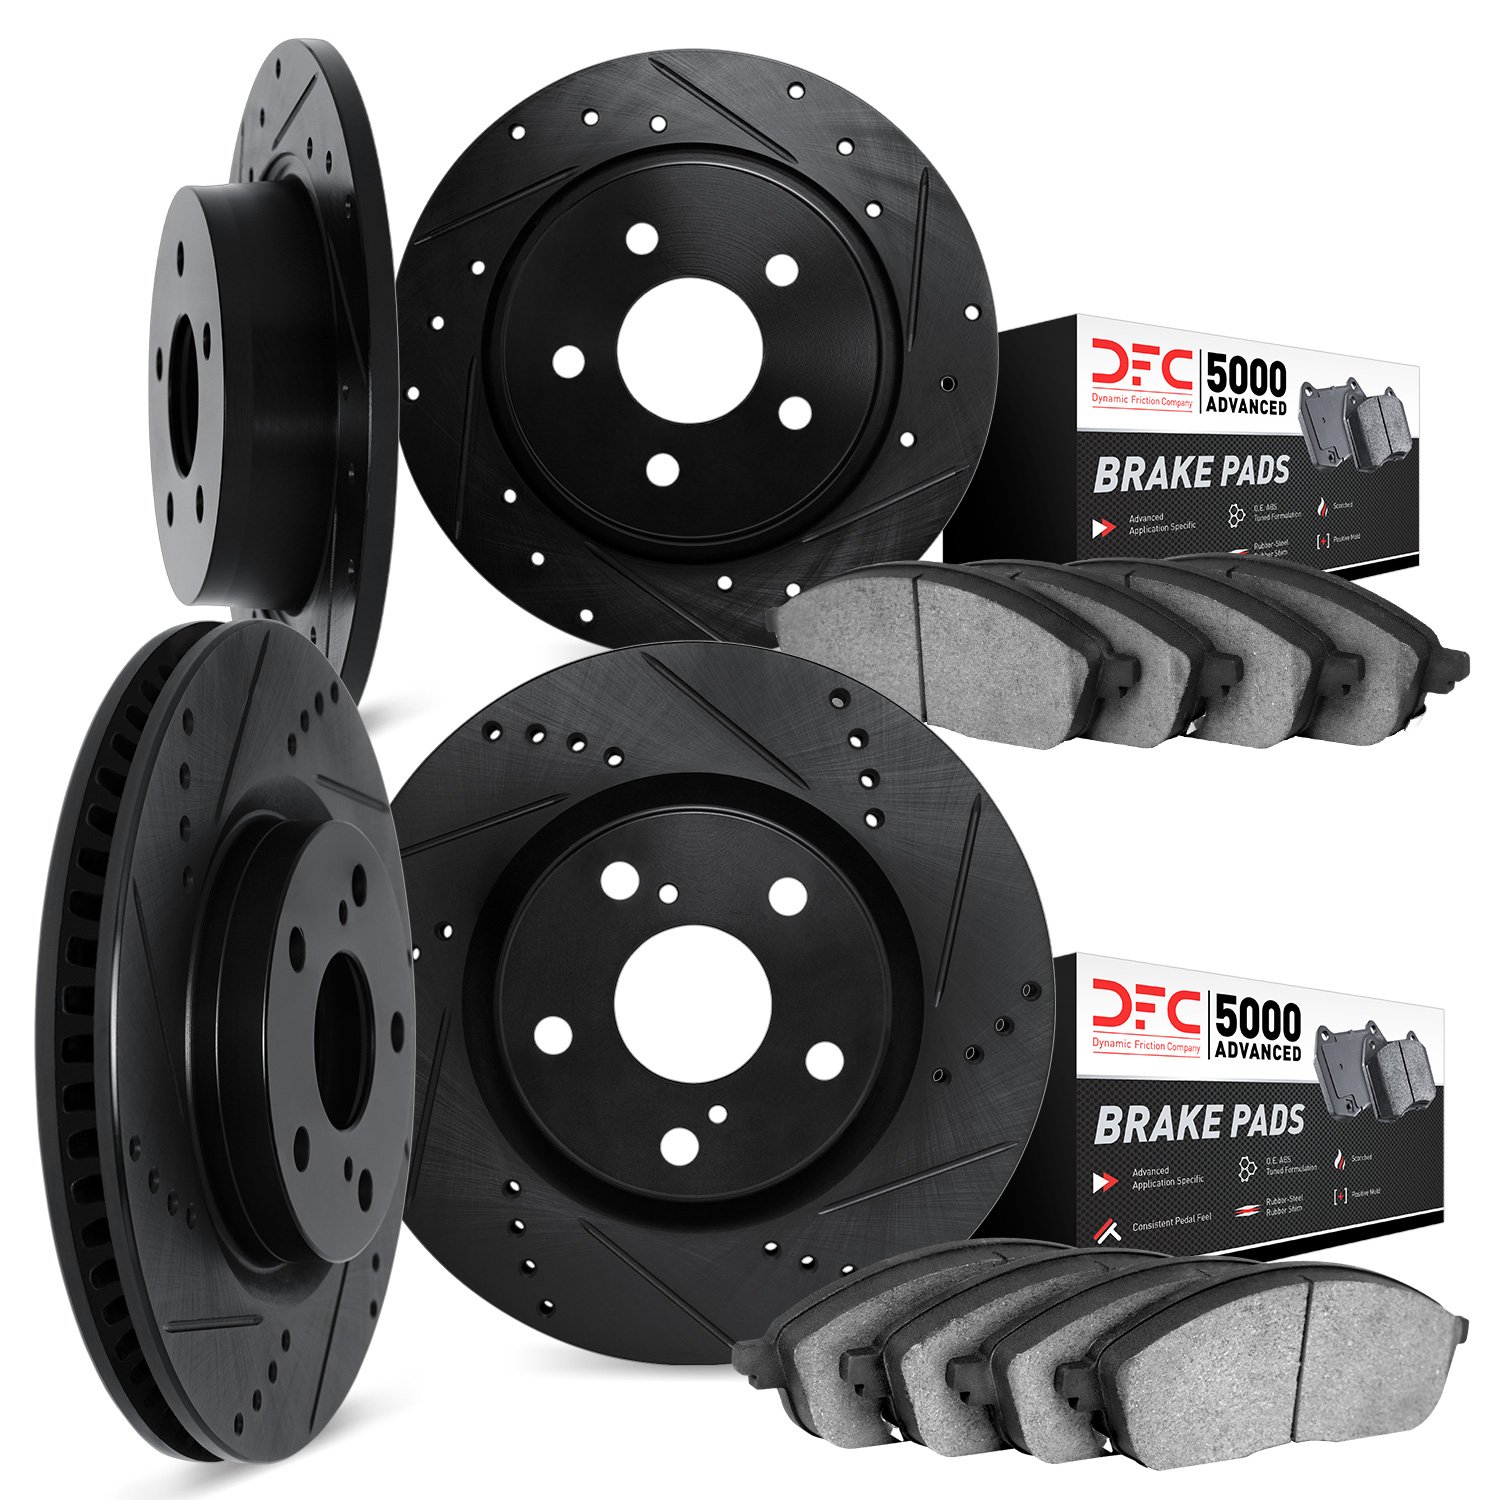 8504-74068 Drilled/Slotted Brake Rotors w/5000 Advanced Brake Pads Kit [Black], 2006-2010 Audi/Volkswagen, Position: Front and R